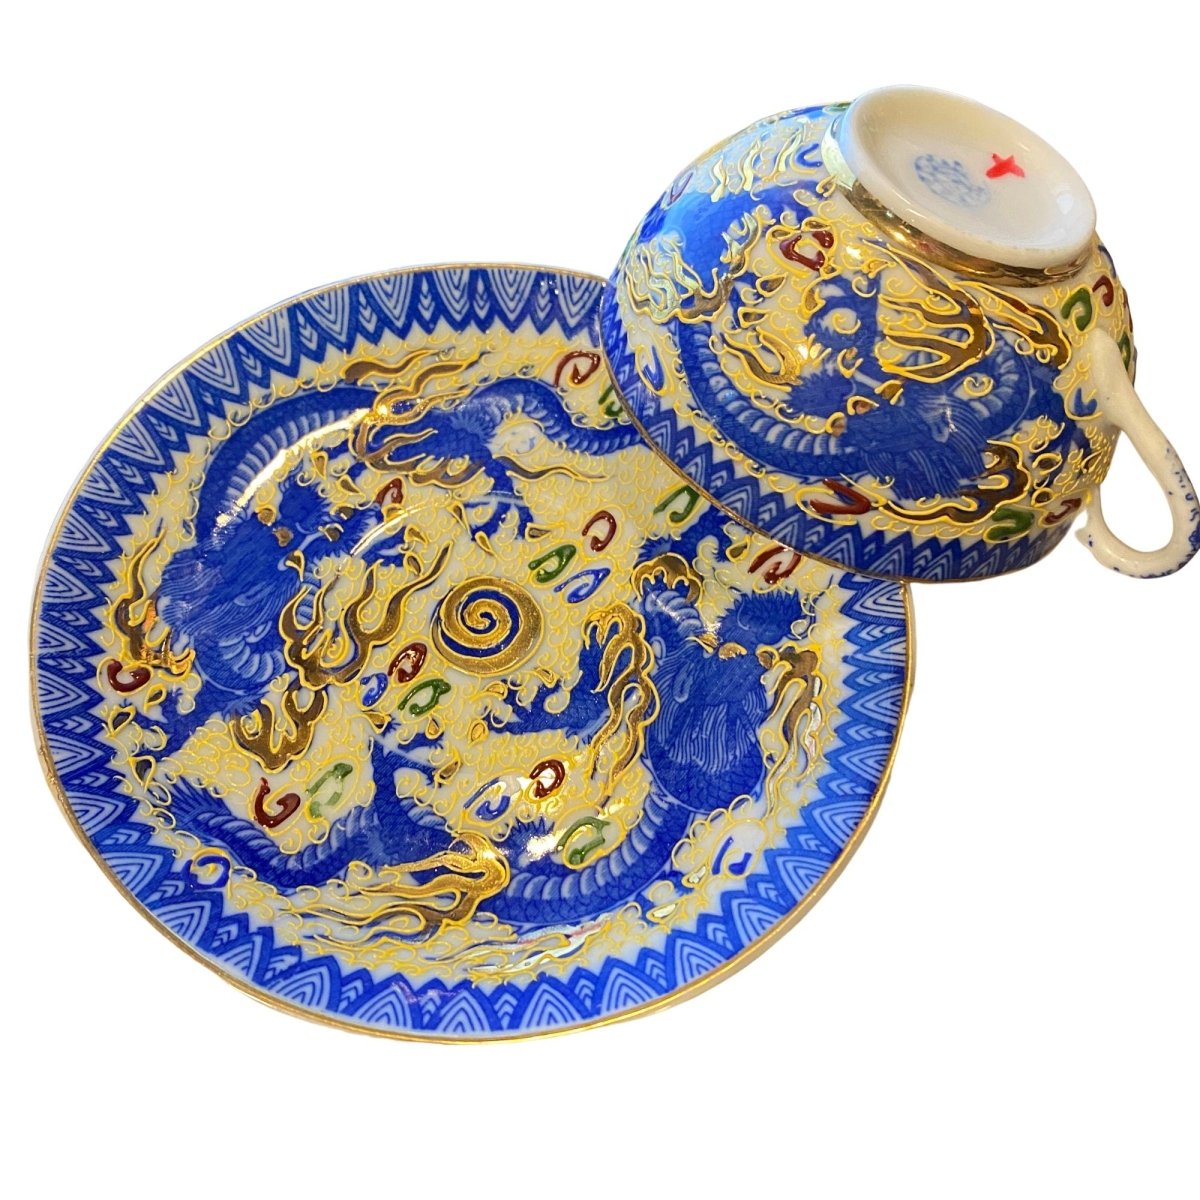 Eggshell Porcelain | Bright blue & Gold Leaf Dragonware | Teacup and Saucer | Japanese Moriage in Yellow c.1940s - Chinamania.shop